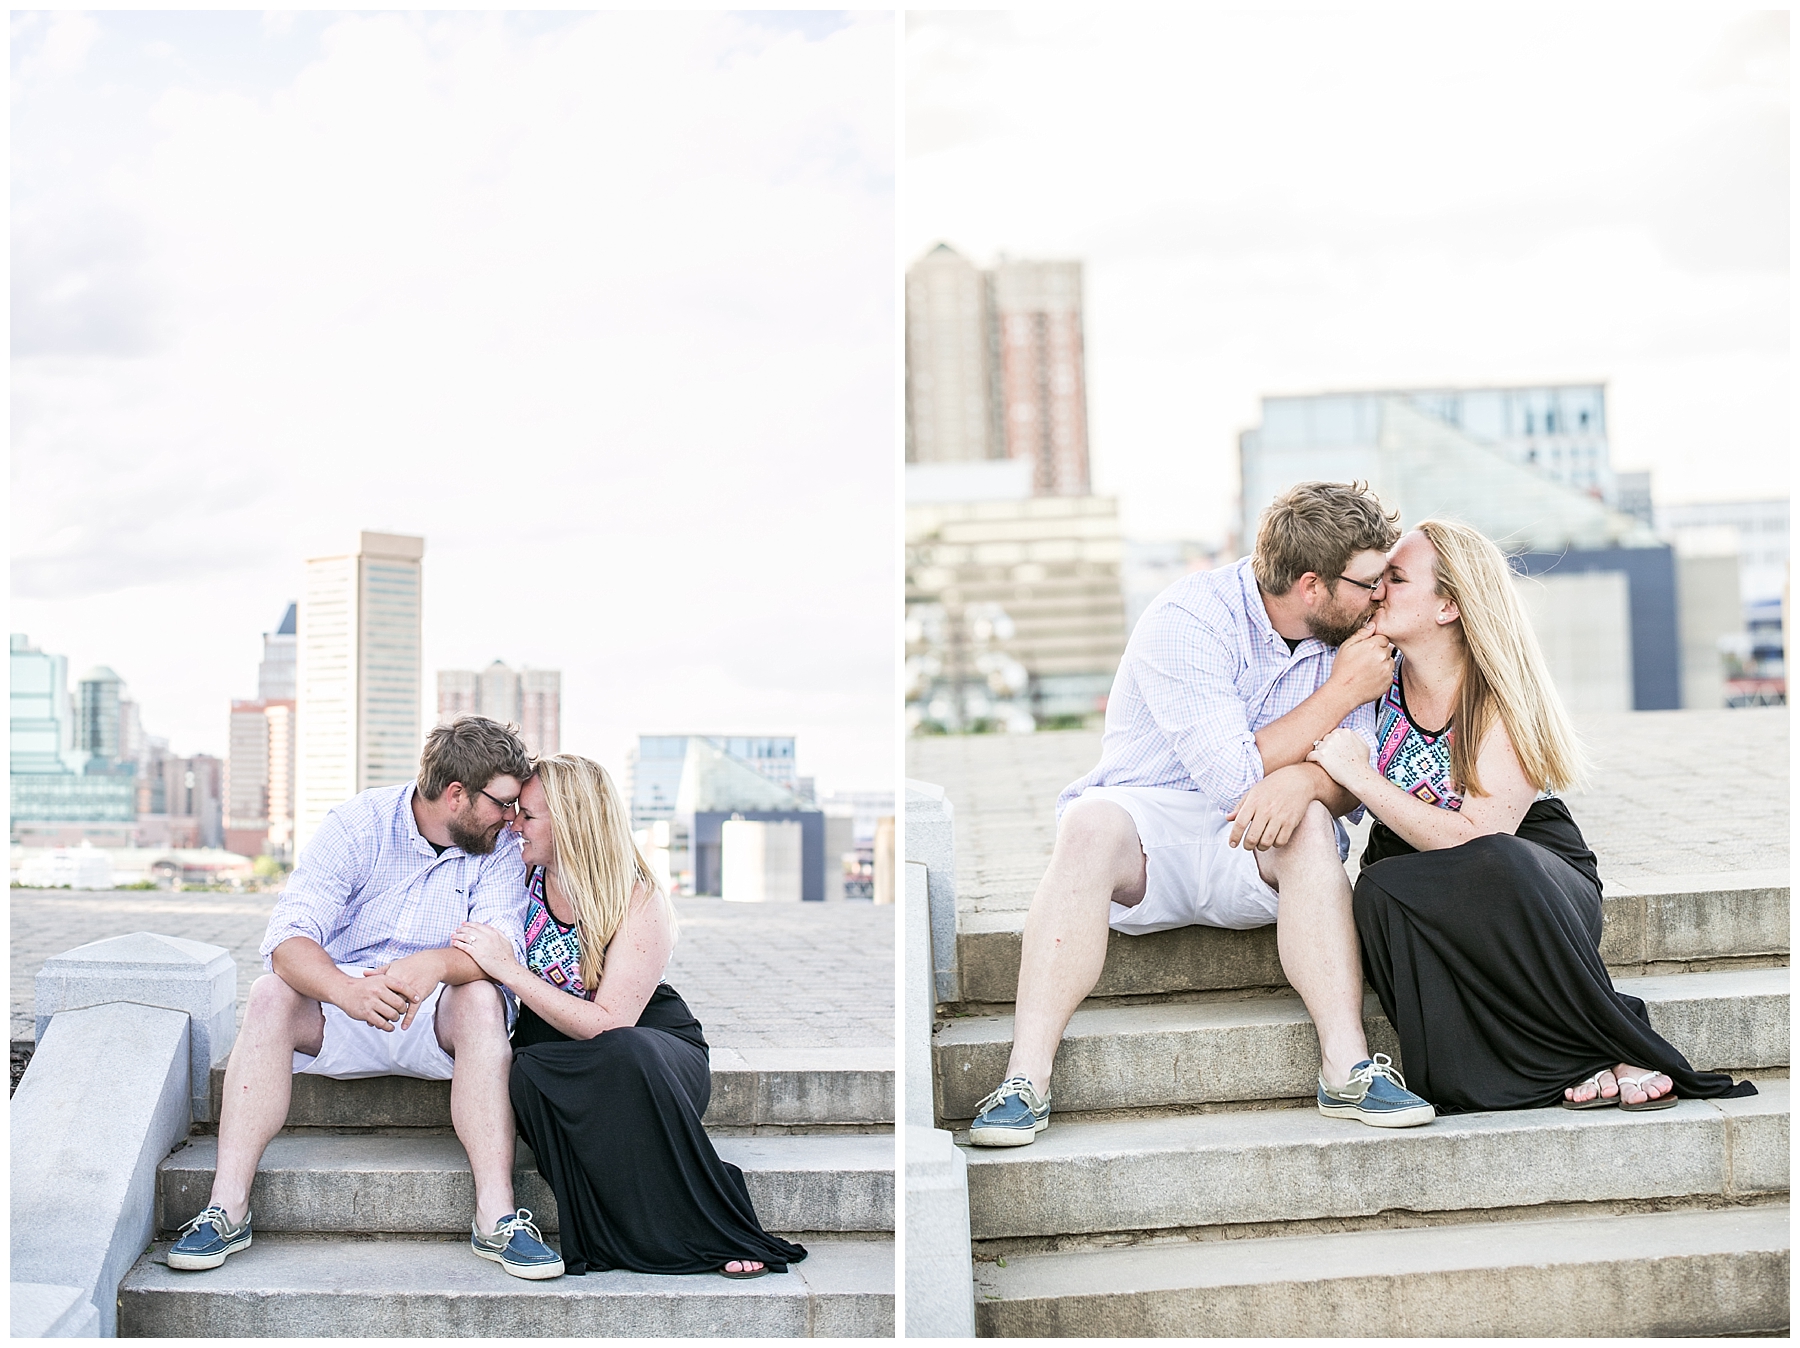 Tess Ray Camden Yards Engagement Session Living Radiant Photography photos_0044.jpg